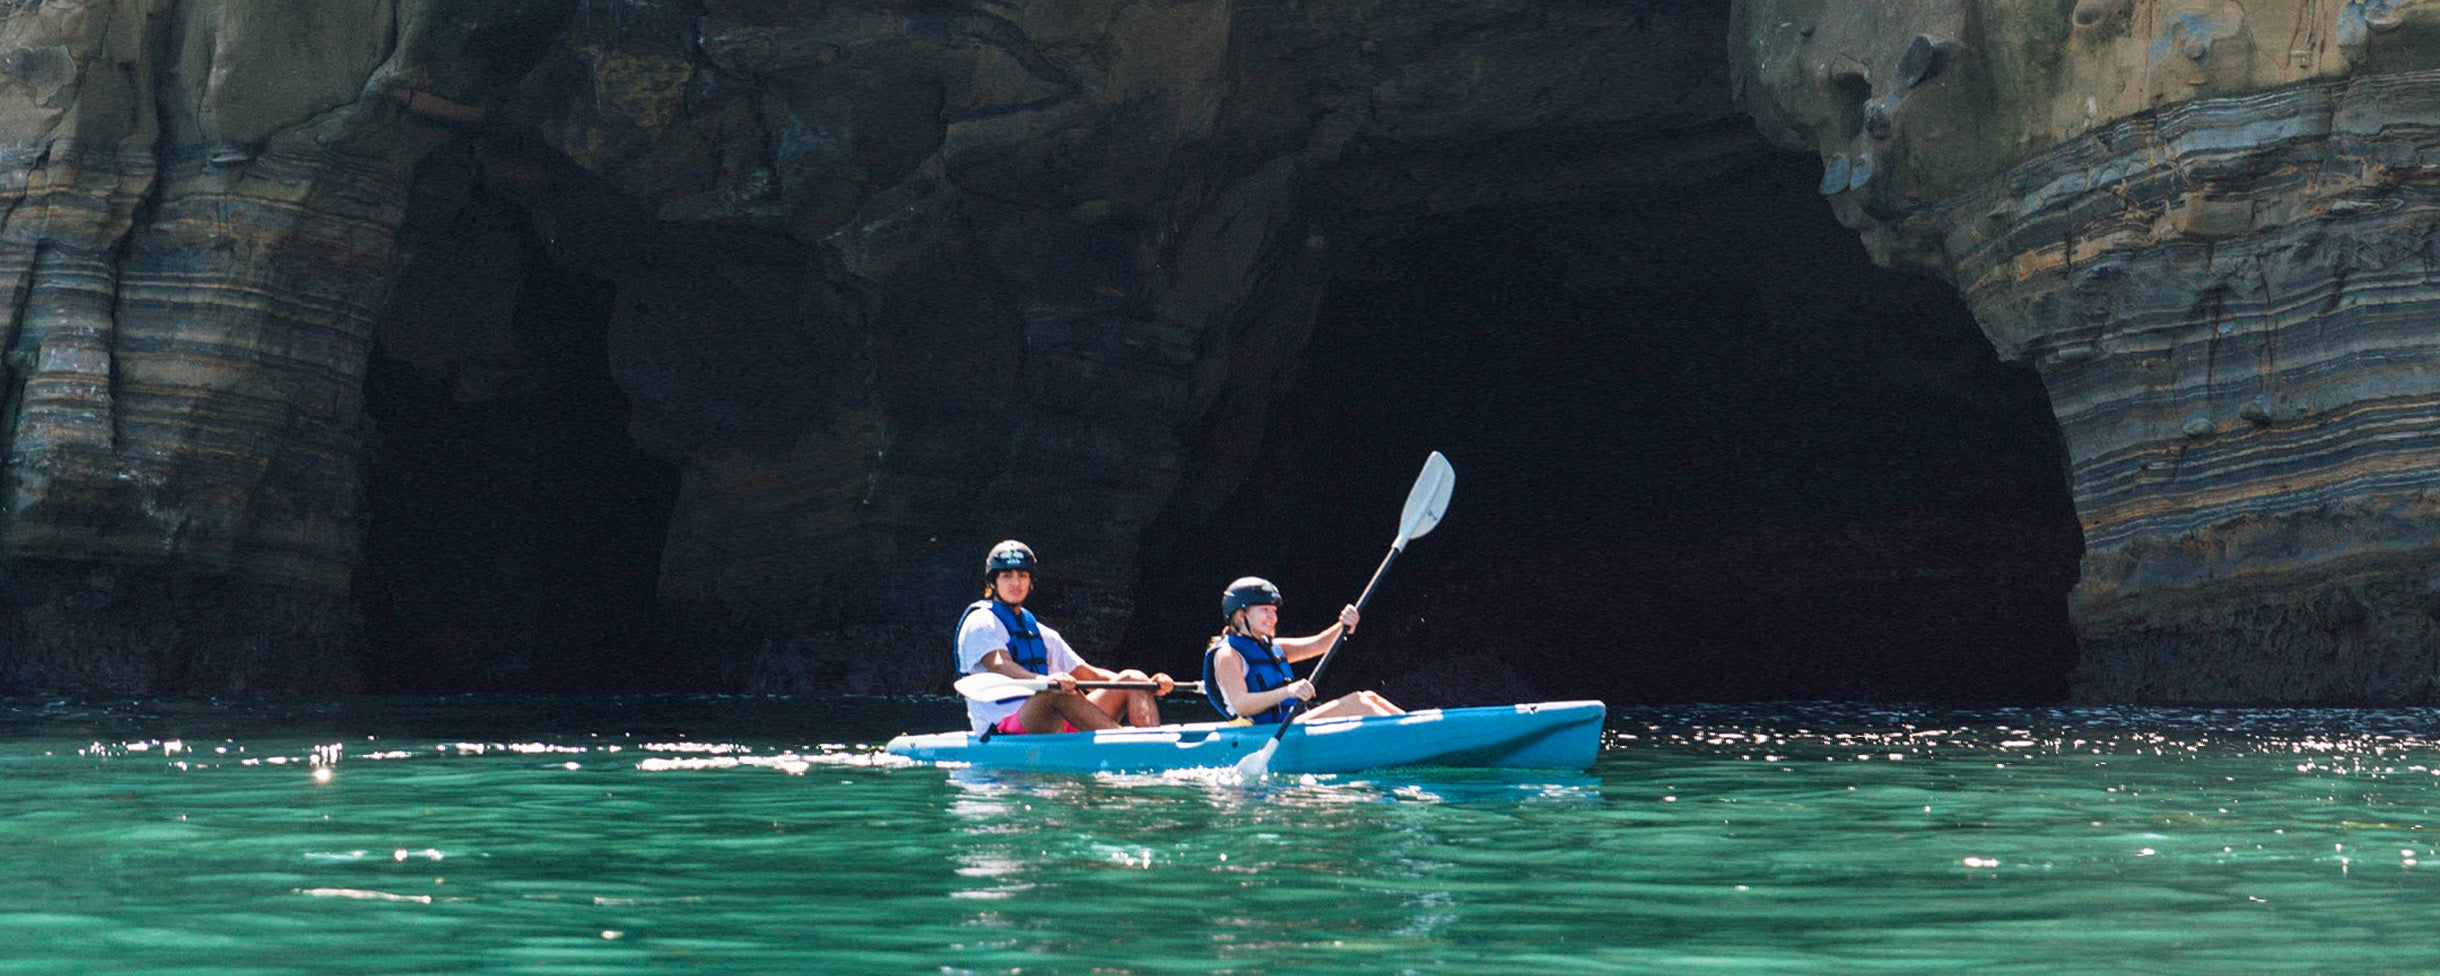 Two kayakers on a Kayaking Tour with Everyday California, paddling their kayak in front of the entrance of a sea cave in La Jolla.